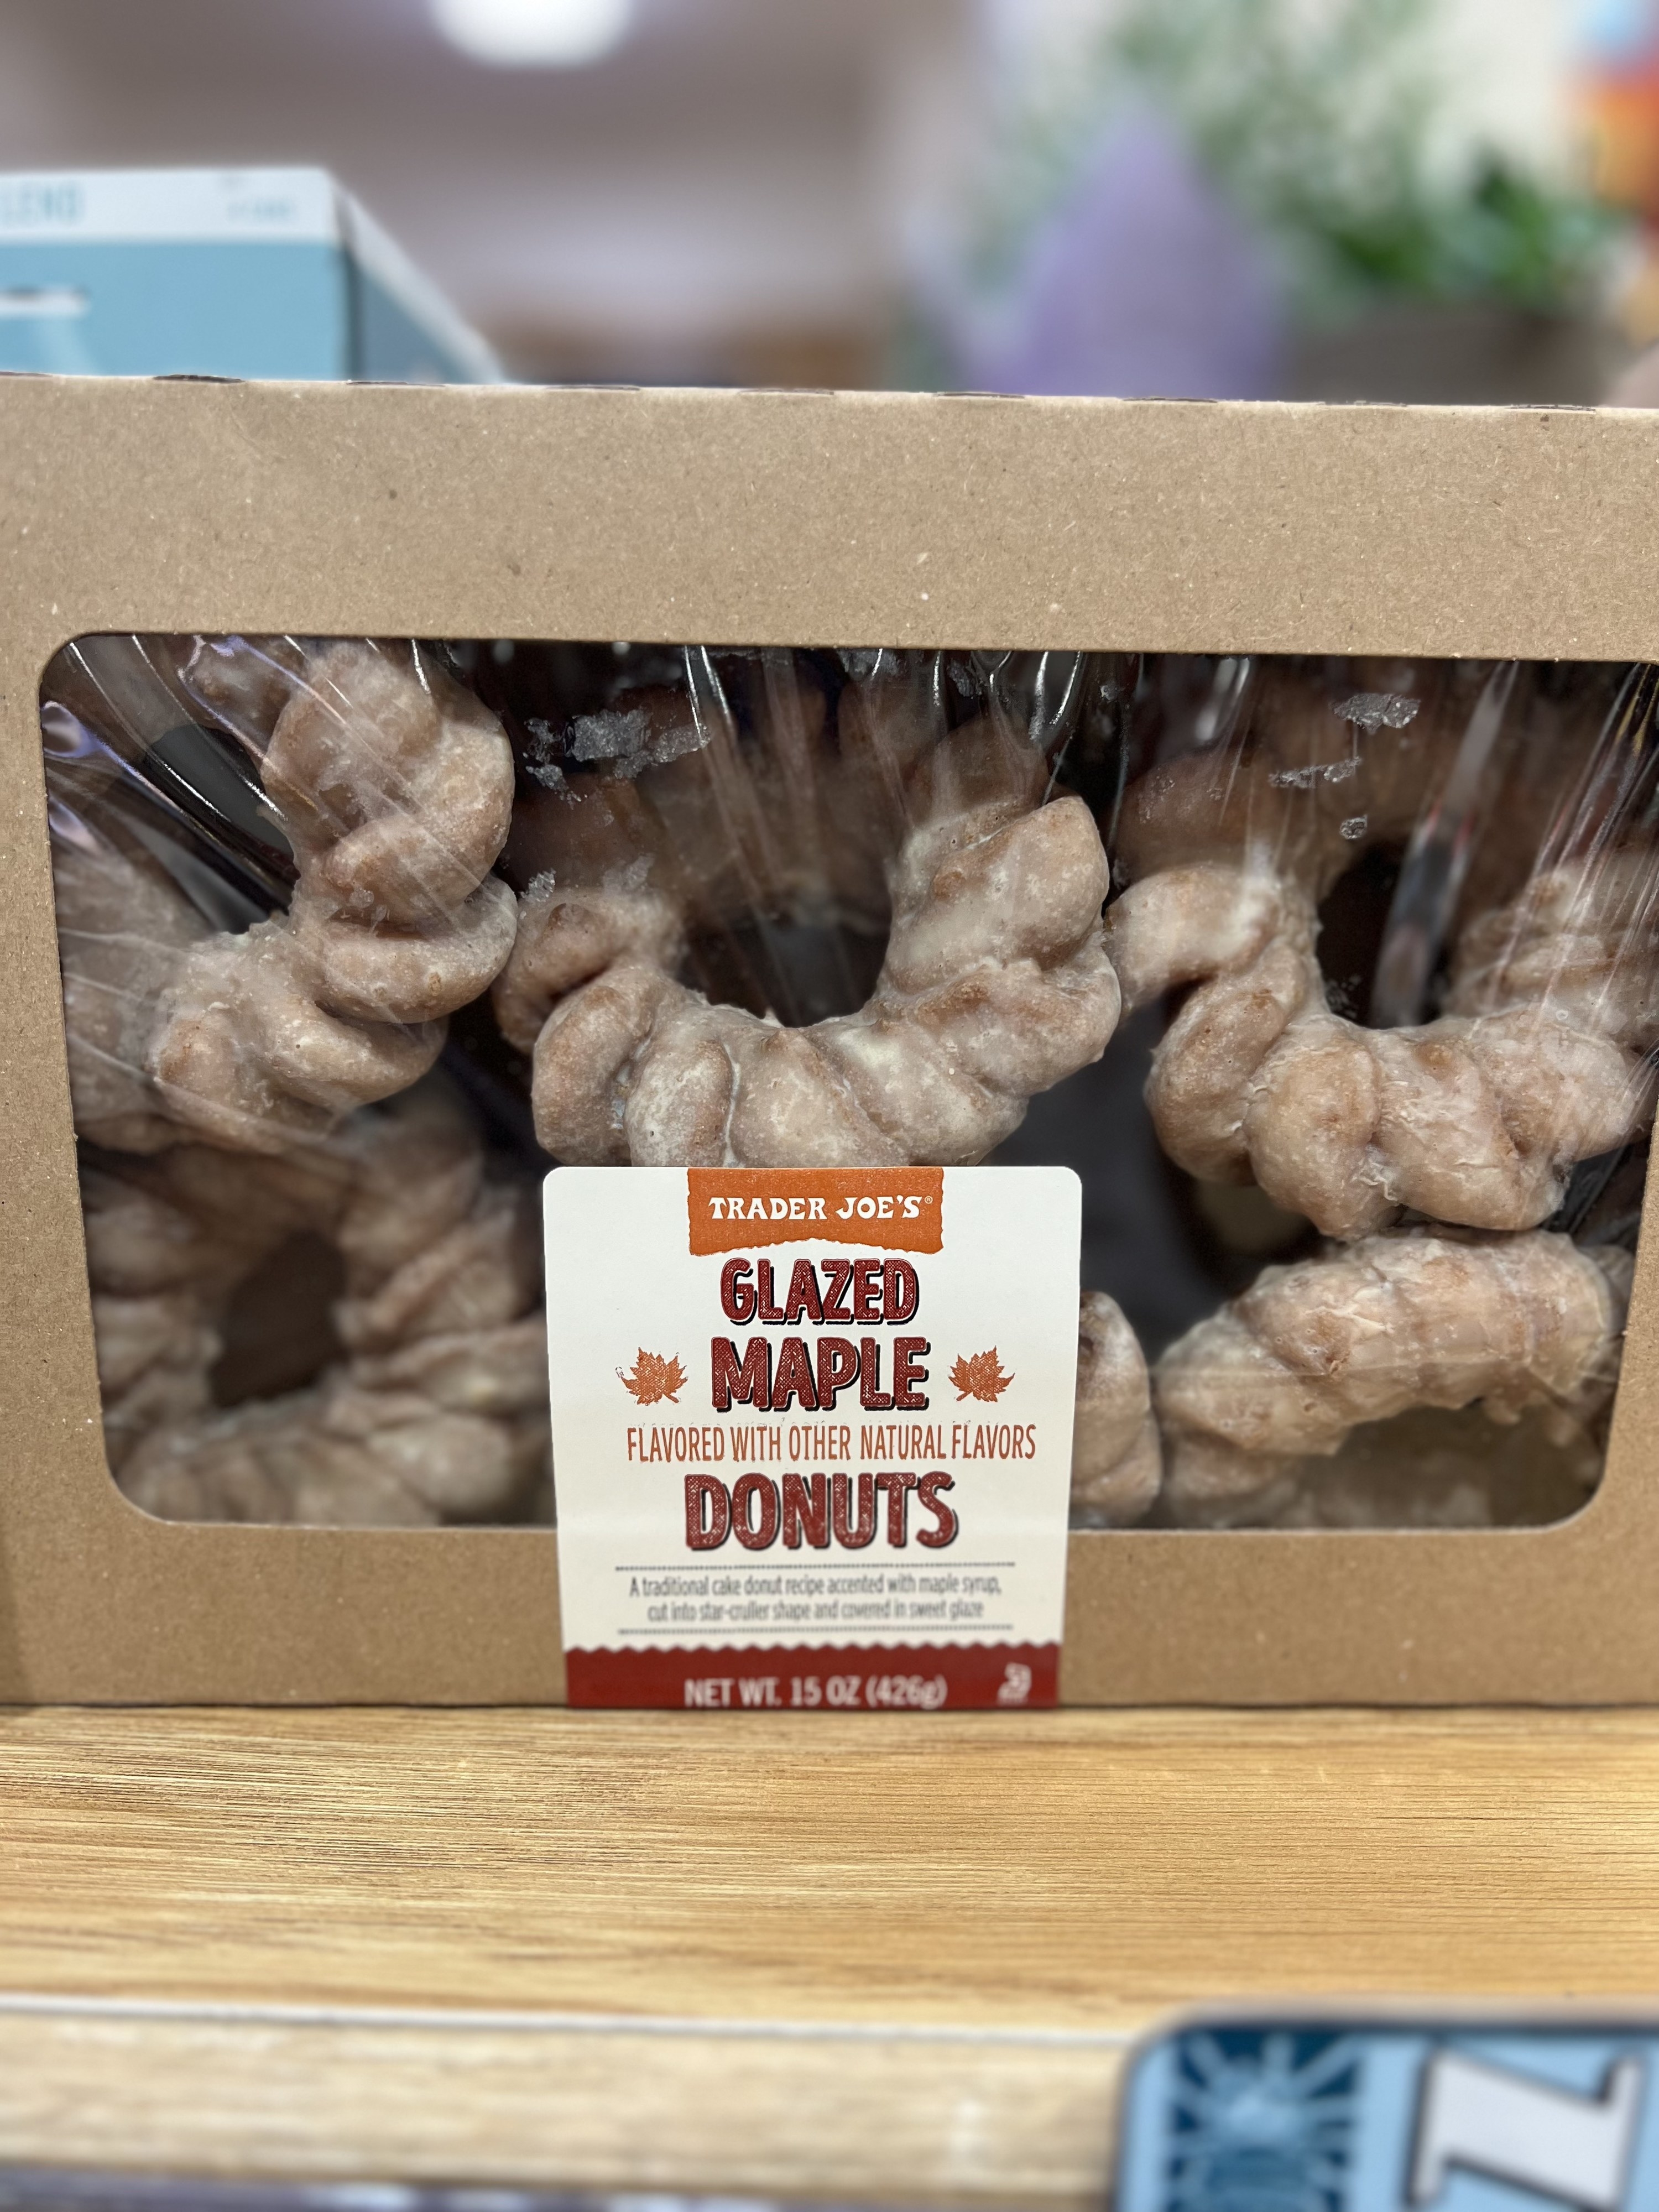 A box of Glazed Maple Donuts